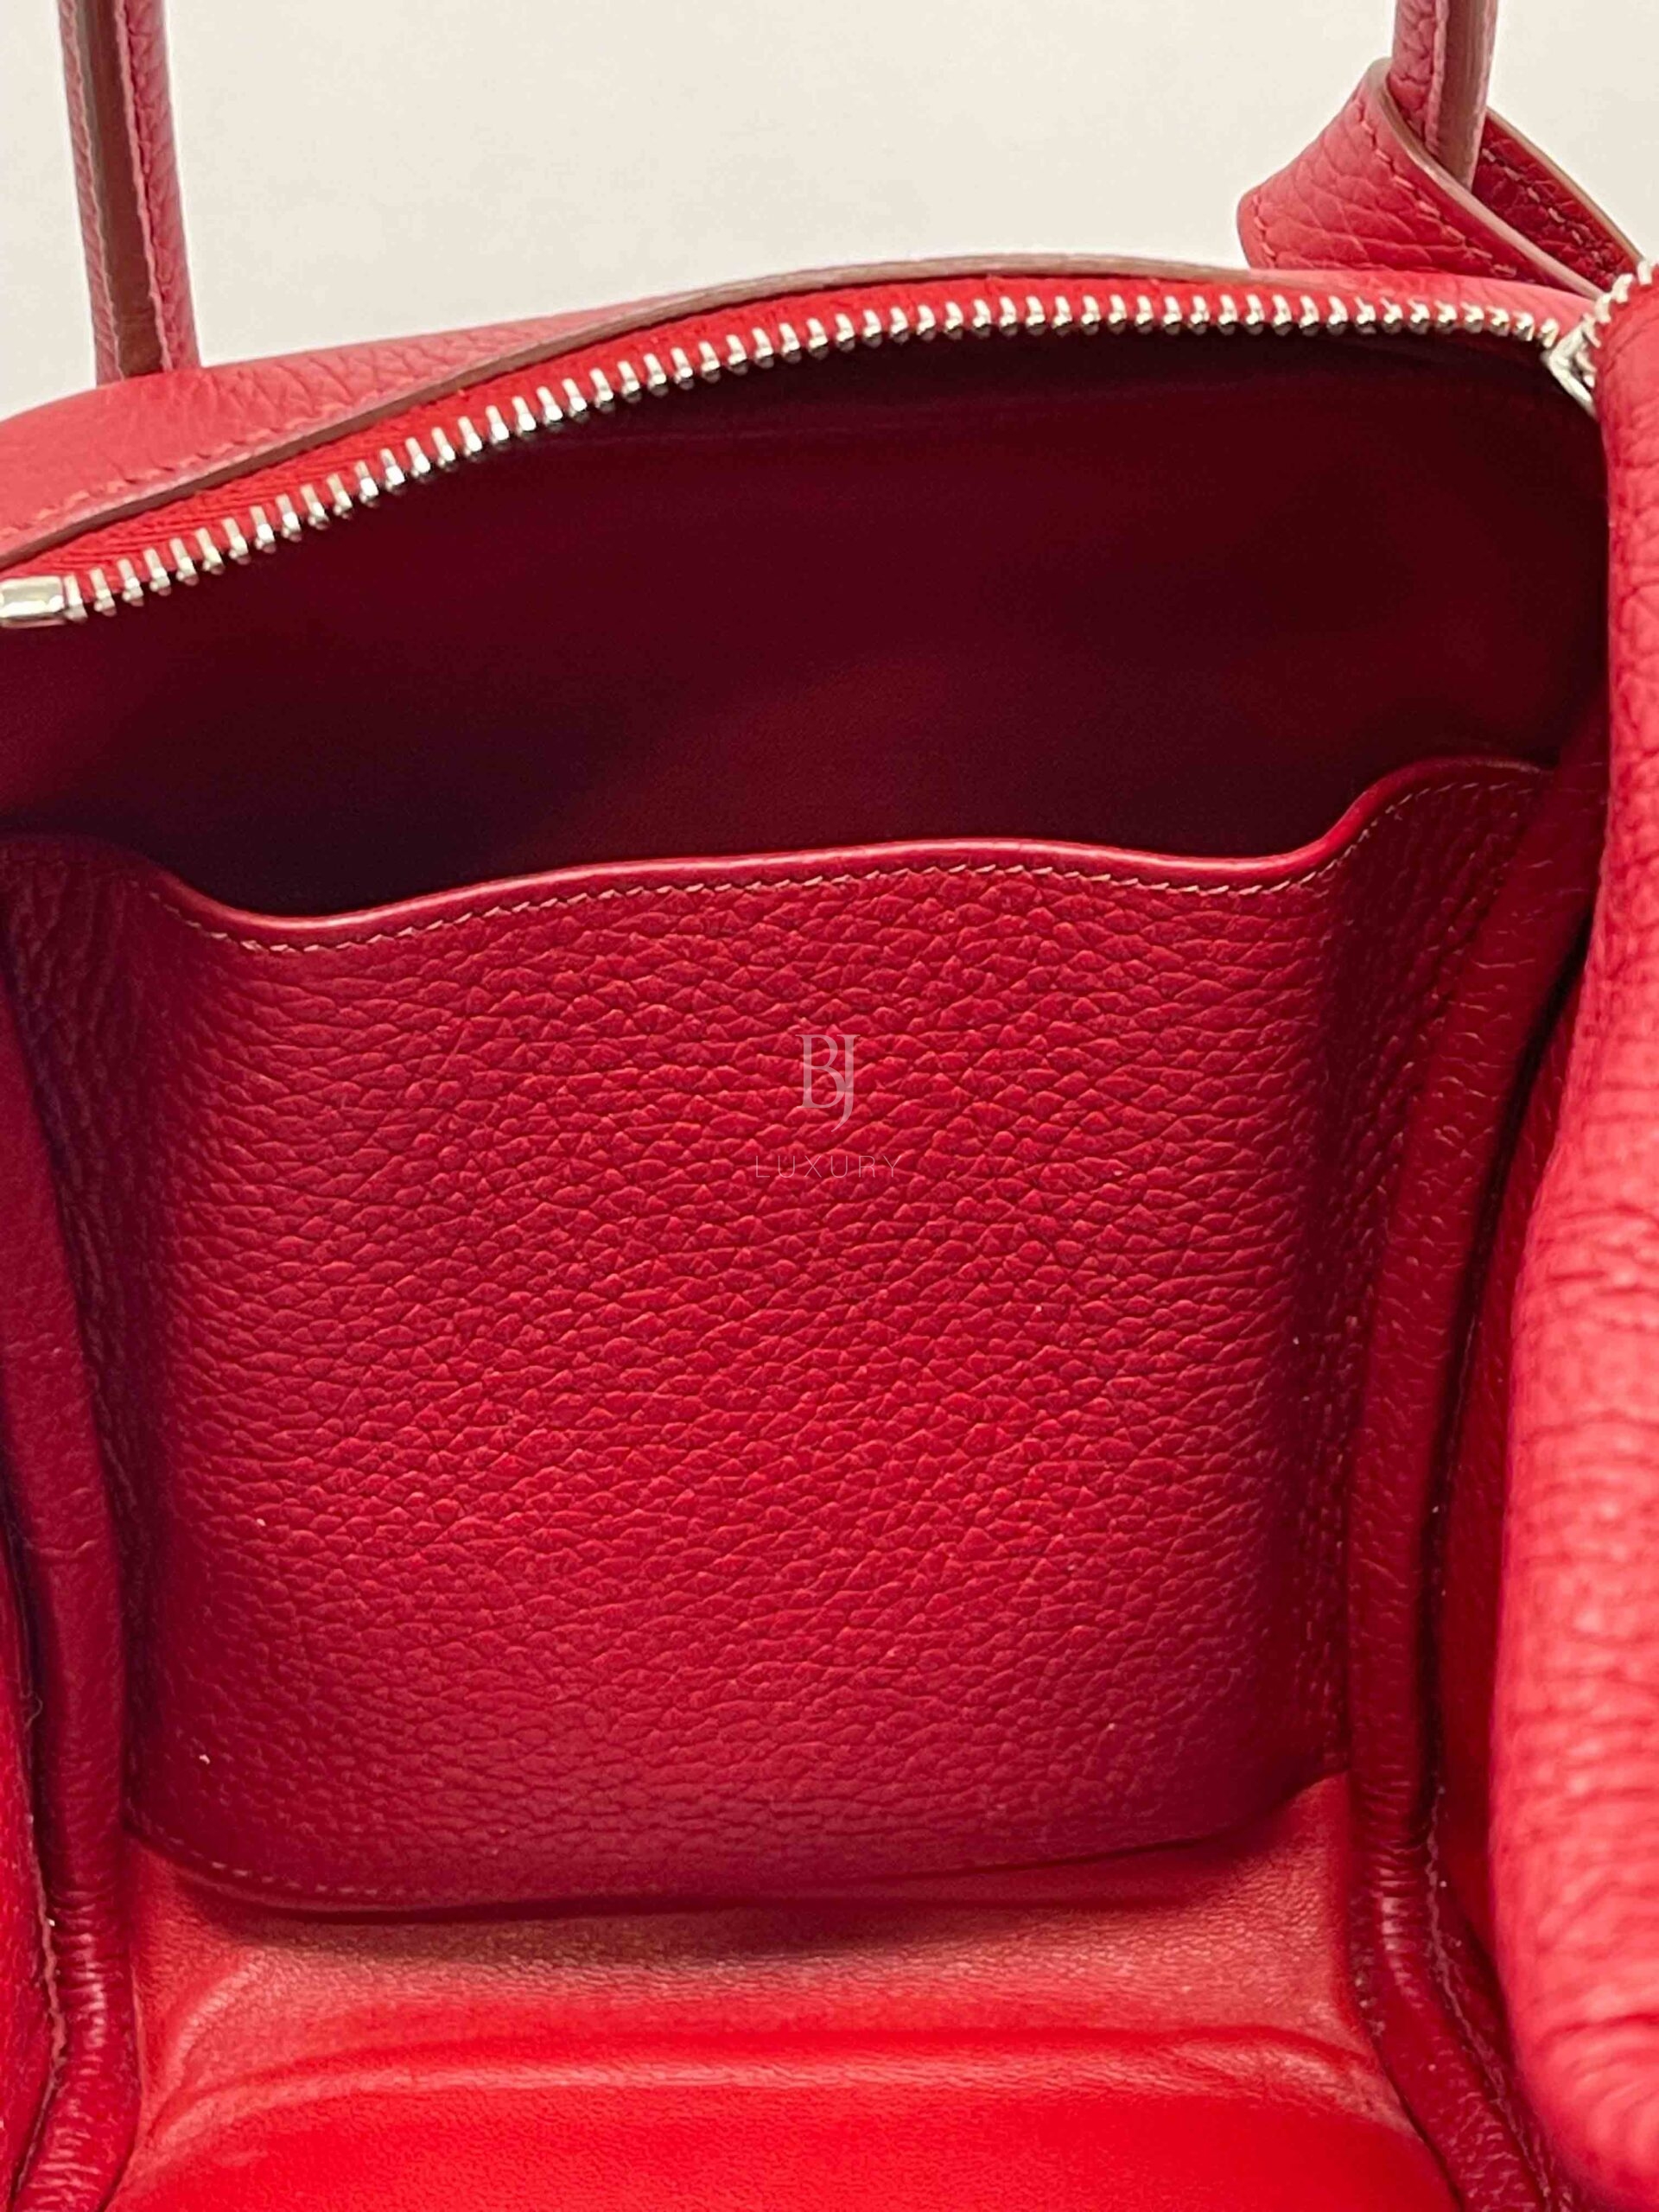 HERMES-LINDY-34-ROUGEH-CLEMENCE-Photo 15-12-22, 10 30 04 AM.jpg